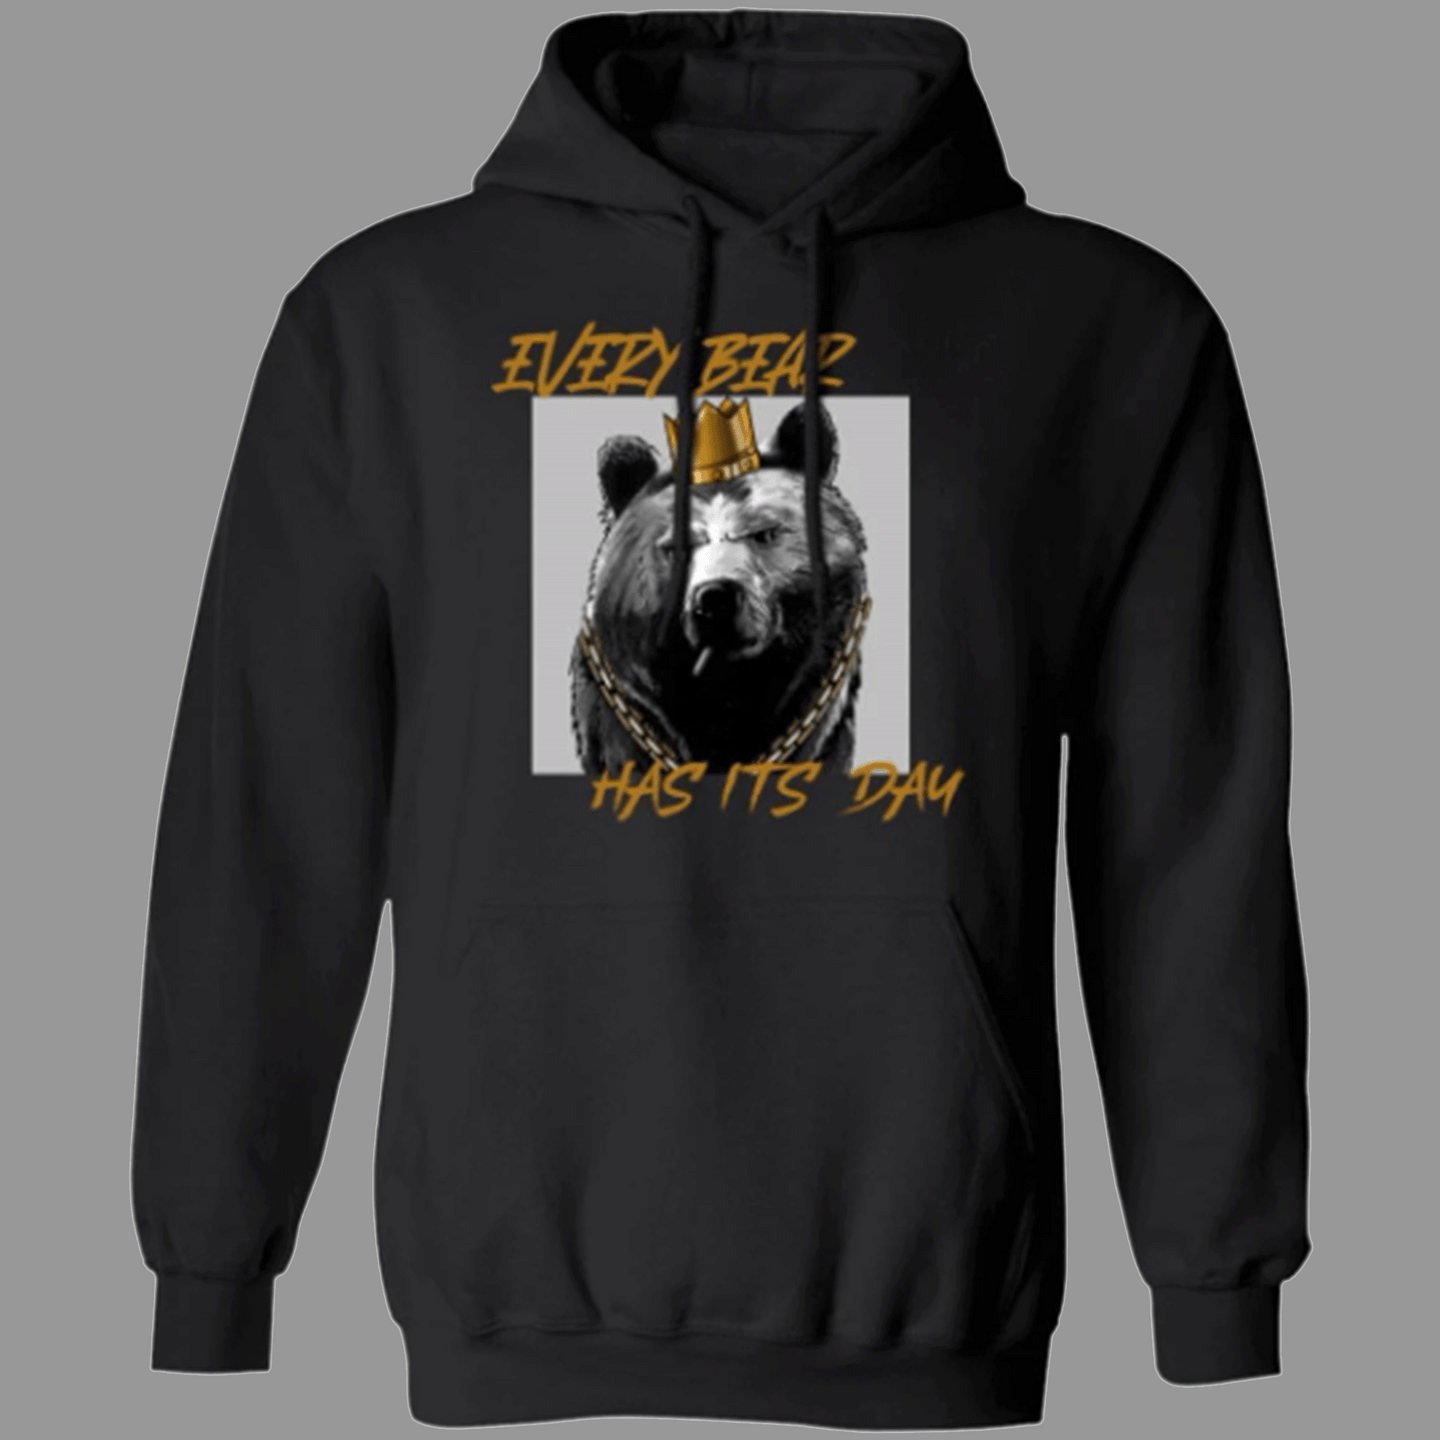 Every Bear Has Its Day – Pullover Hoodies & Sweatshirts